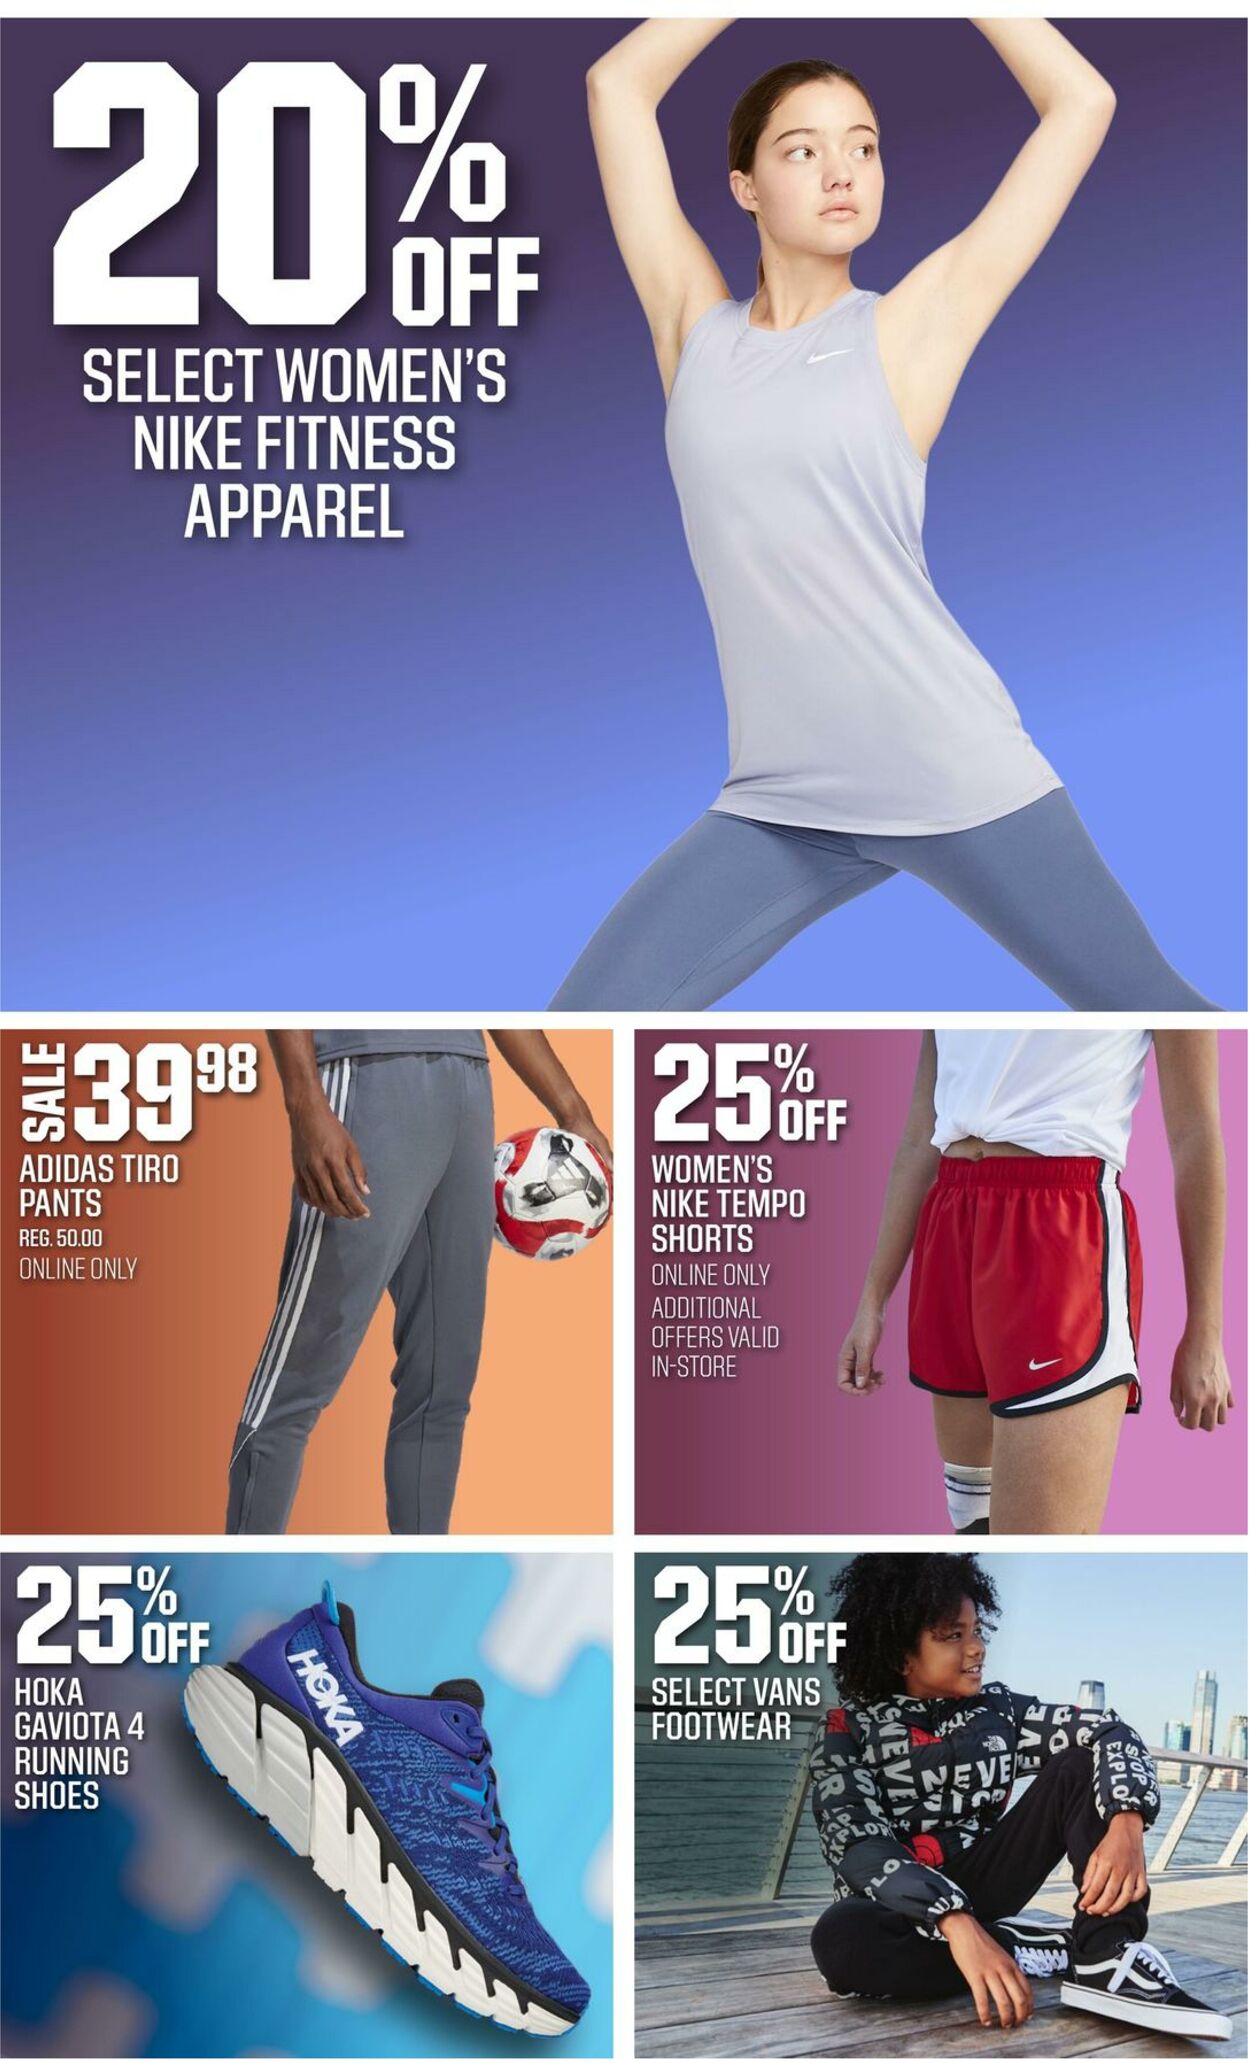 Weekly ad Dick's Sporting Goods 08/06/2023 - 08/12/2023